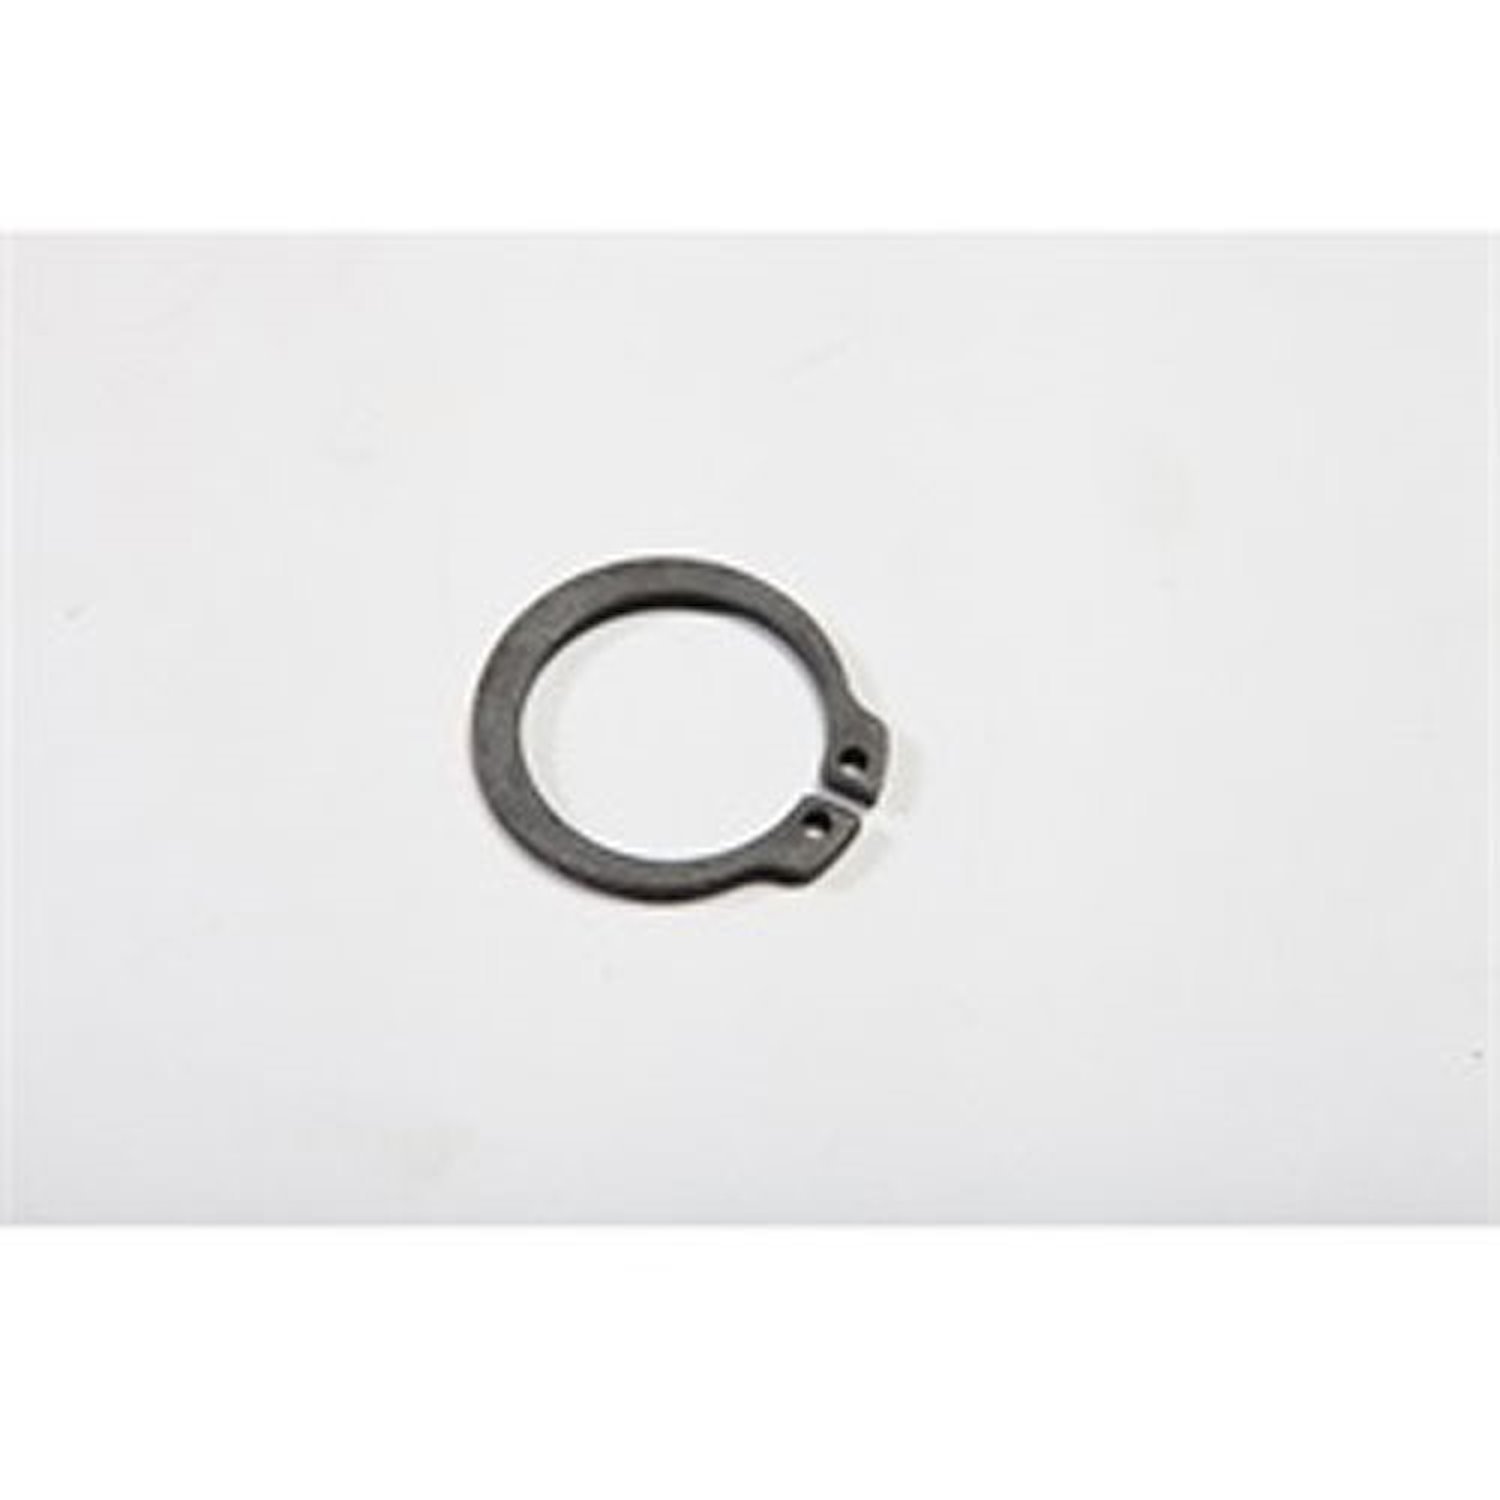 This snap ring is for Dana 300 transfer case input gear from Omix-ADA. It fits 80-86 Jeep CJ models.